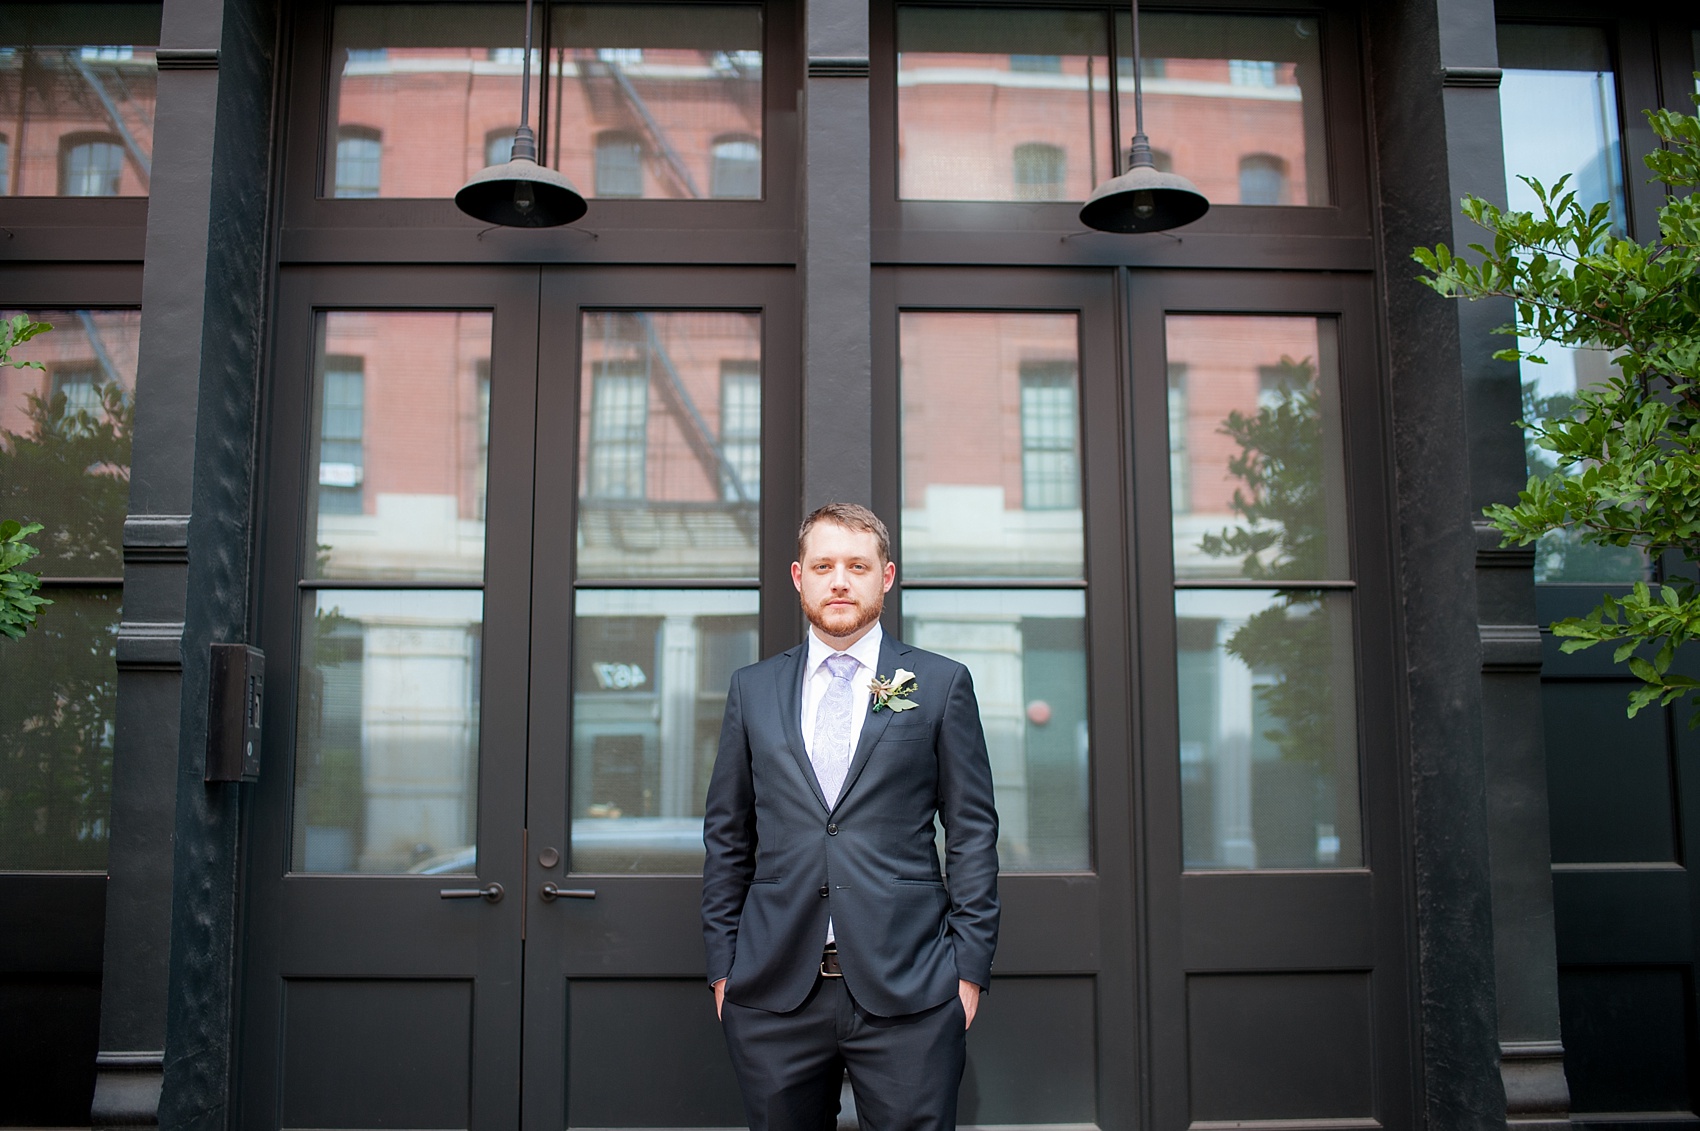 Mikkel Paige Photography photos of a NYC wedding at Tribeca Rooftop. An urban portrait of the groom in lower Manhattan.